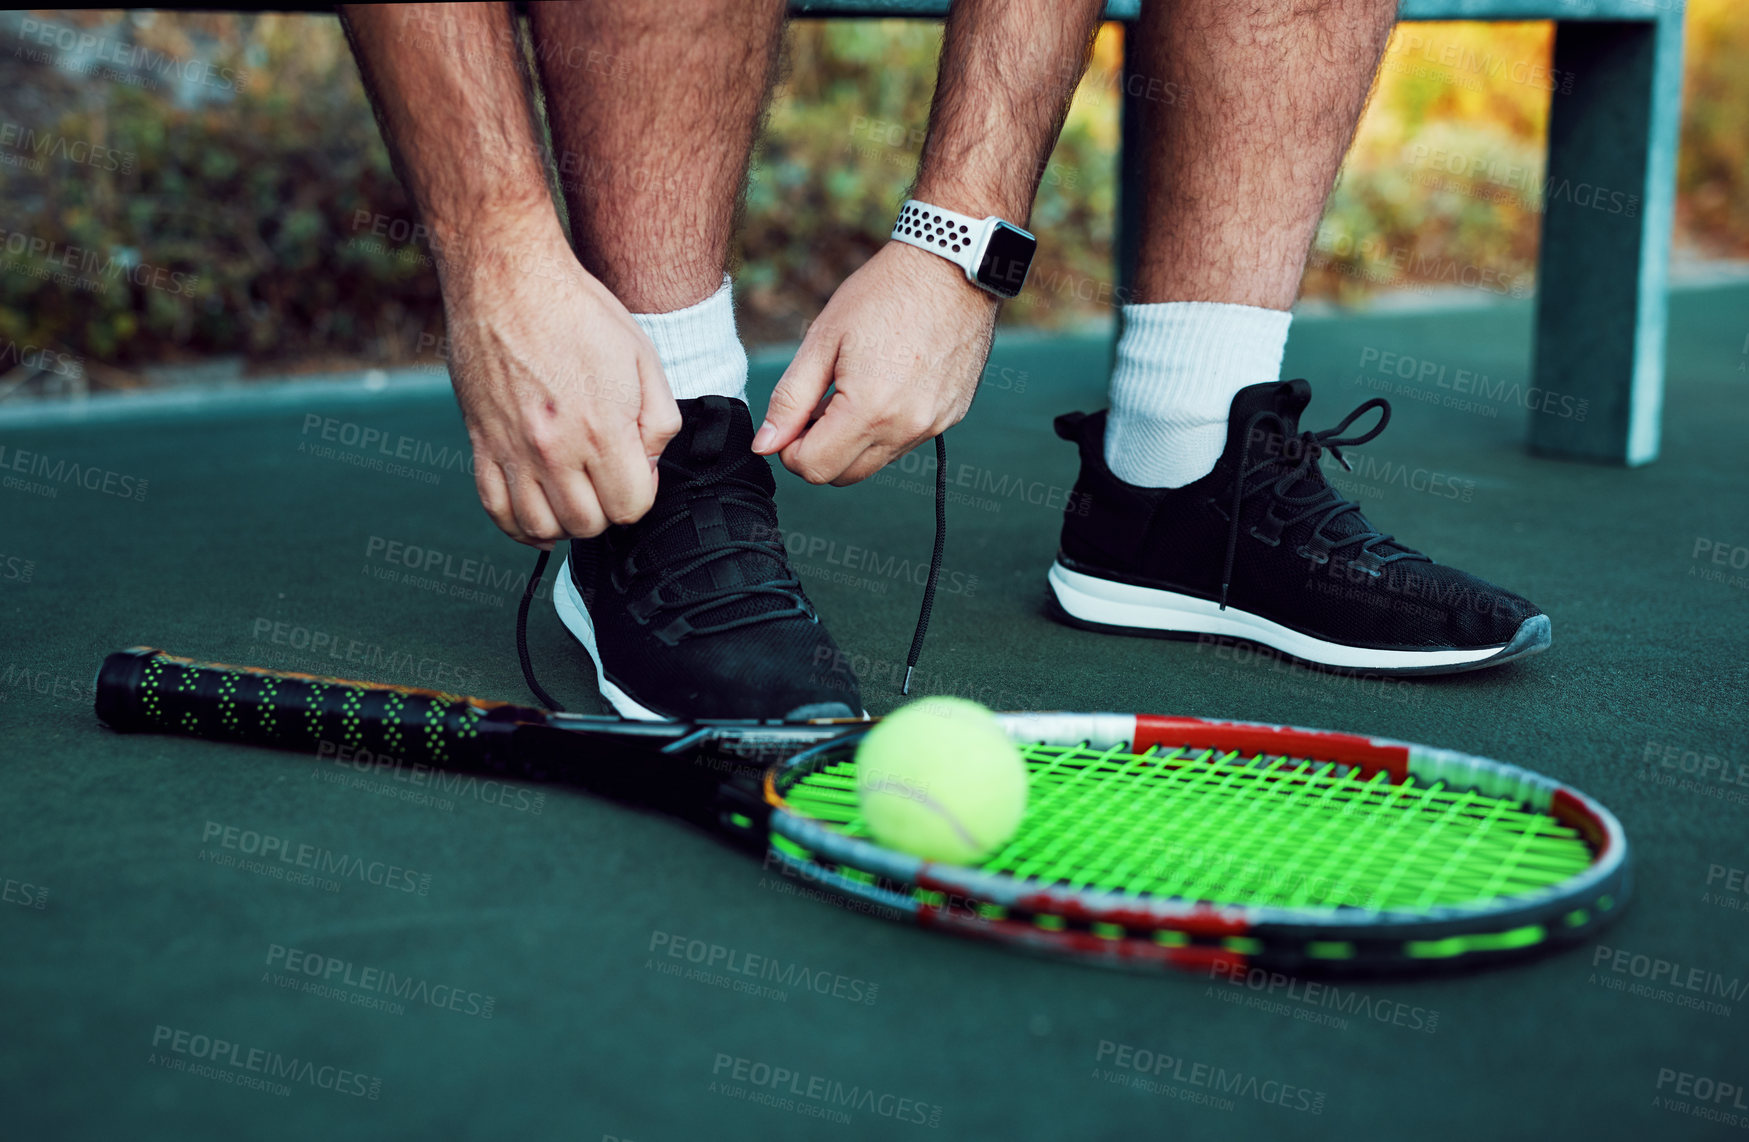 Buy stock photo Closeup shot of an unrecognisable man tying his laces on a tennis court